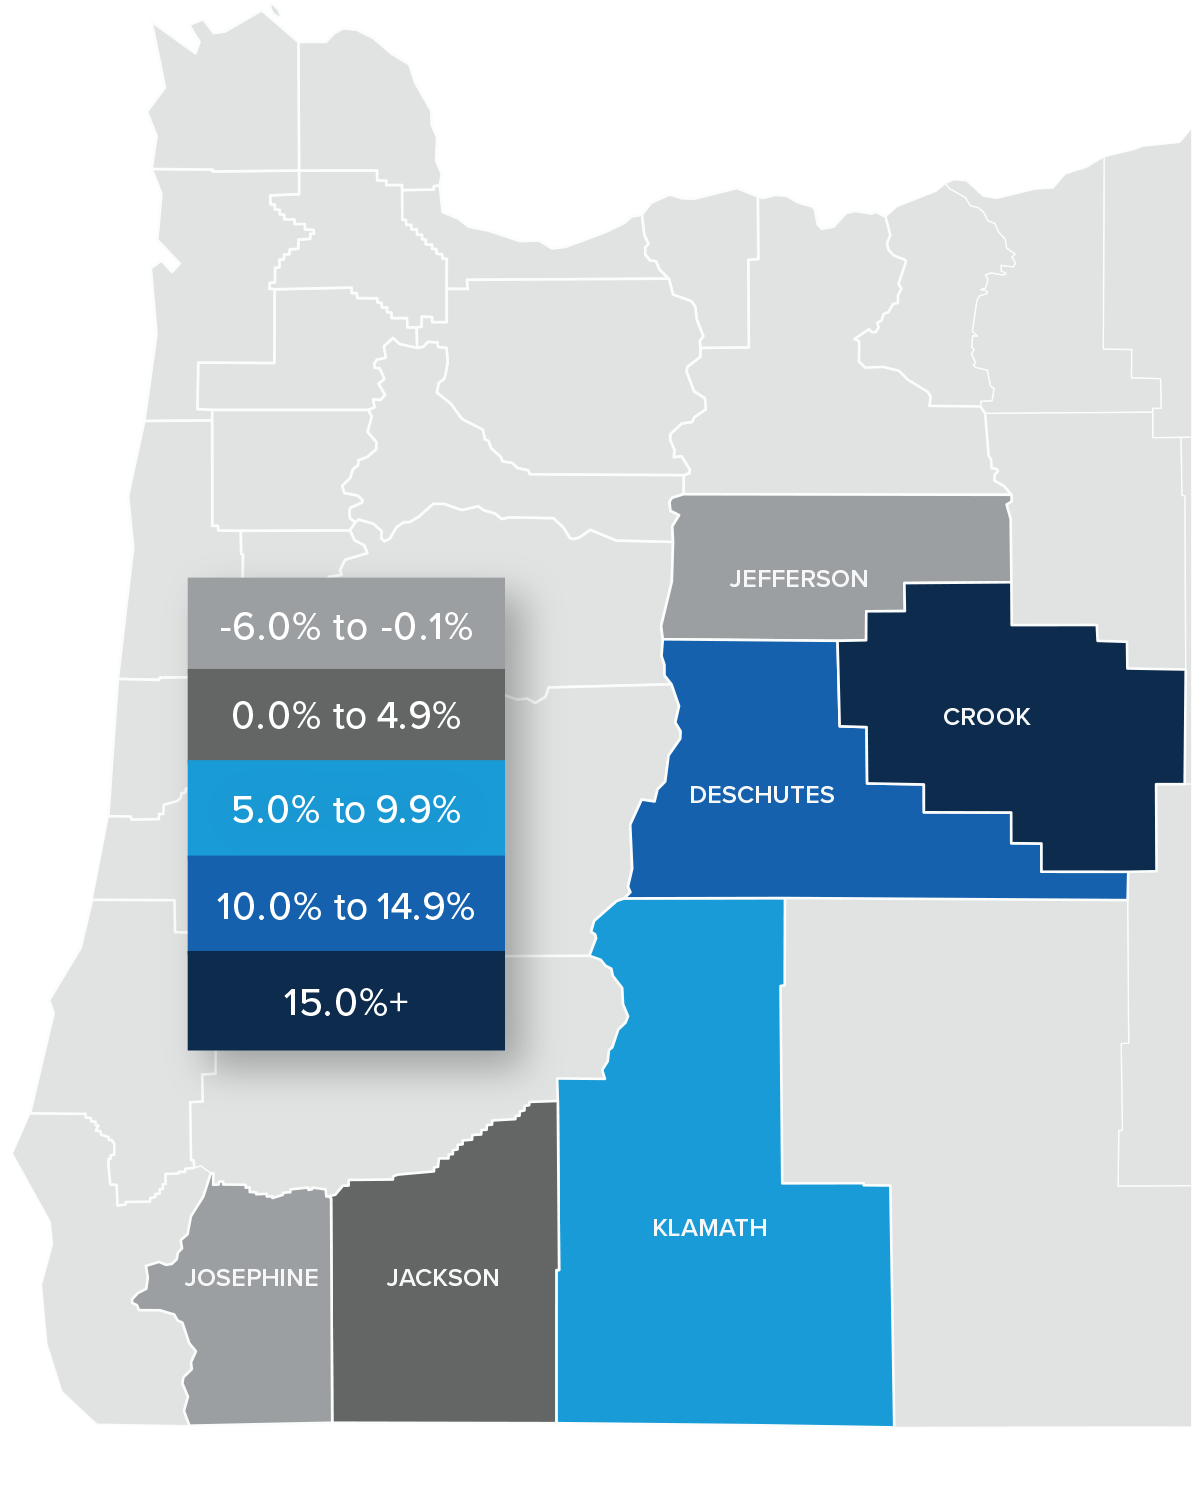 A map showing the real estate home prices percentage changes for various counties in Central and Southern Oregon. Different colors correspond to different tiers of percentage change. Jefferson and Josephine County had a percentage change in the -6% to -0.1% range. Jackson is in the 0% to 4.9% change range and Klamath is in the 5% to 9.9% range. Deschutes is in the 10% to 14.9% change range, and Crook is in the 15%+ change range.